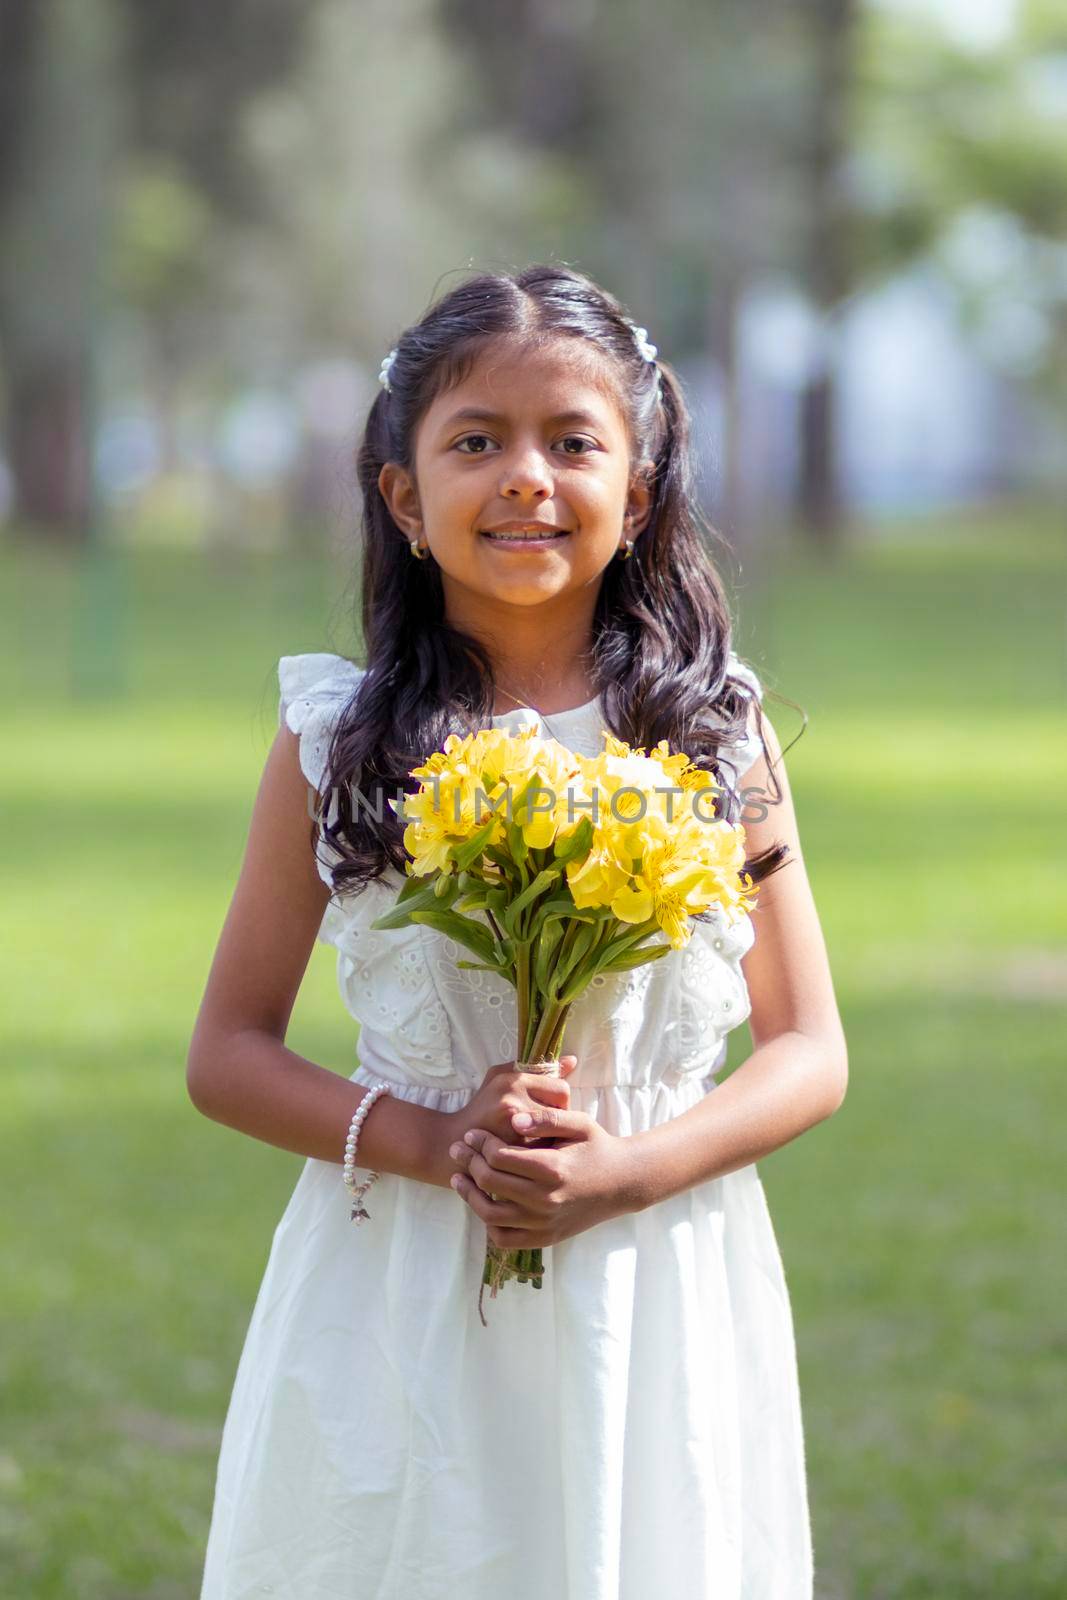 Little girl in white dress and with a cute bouquet of flowers in her hand